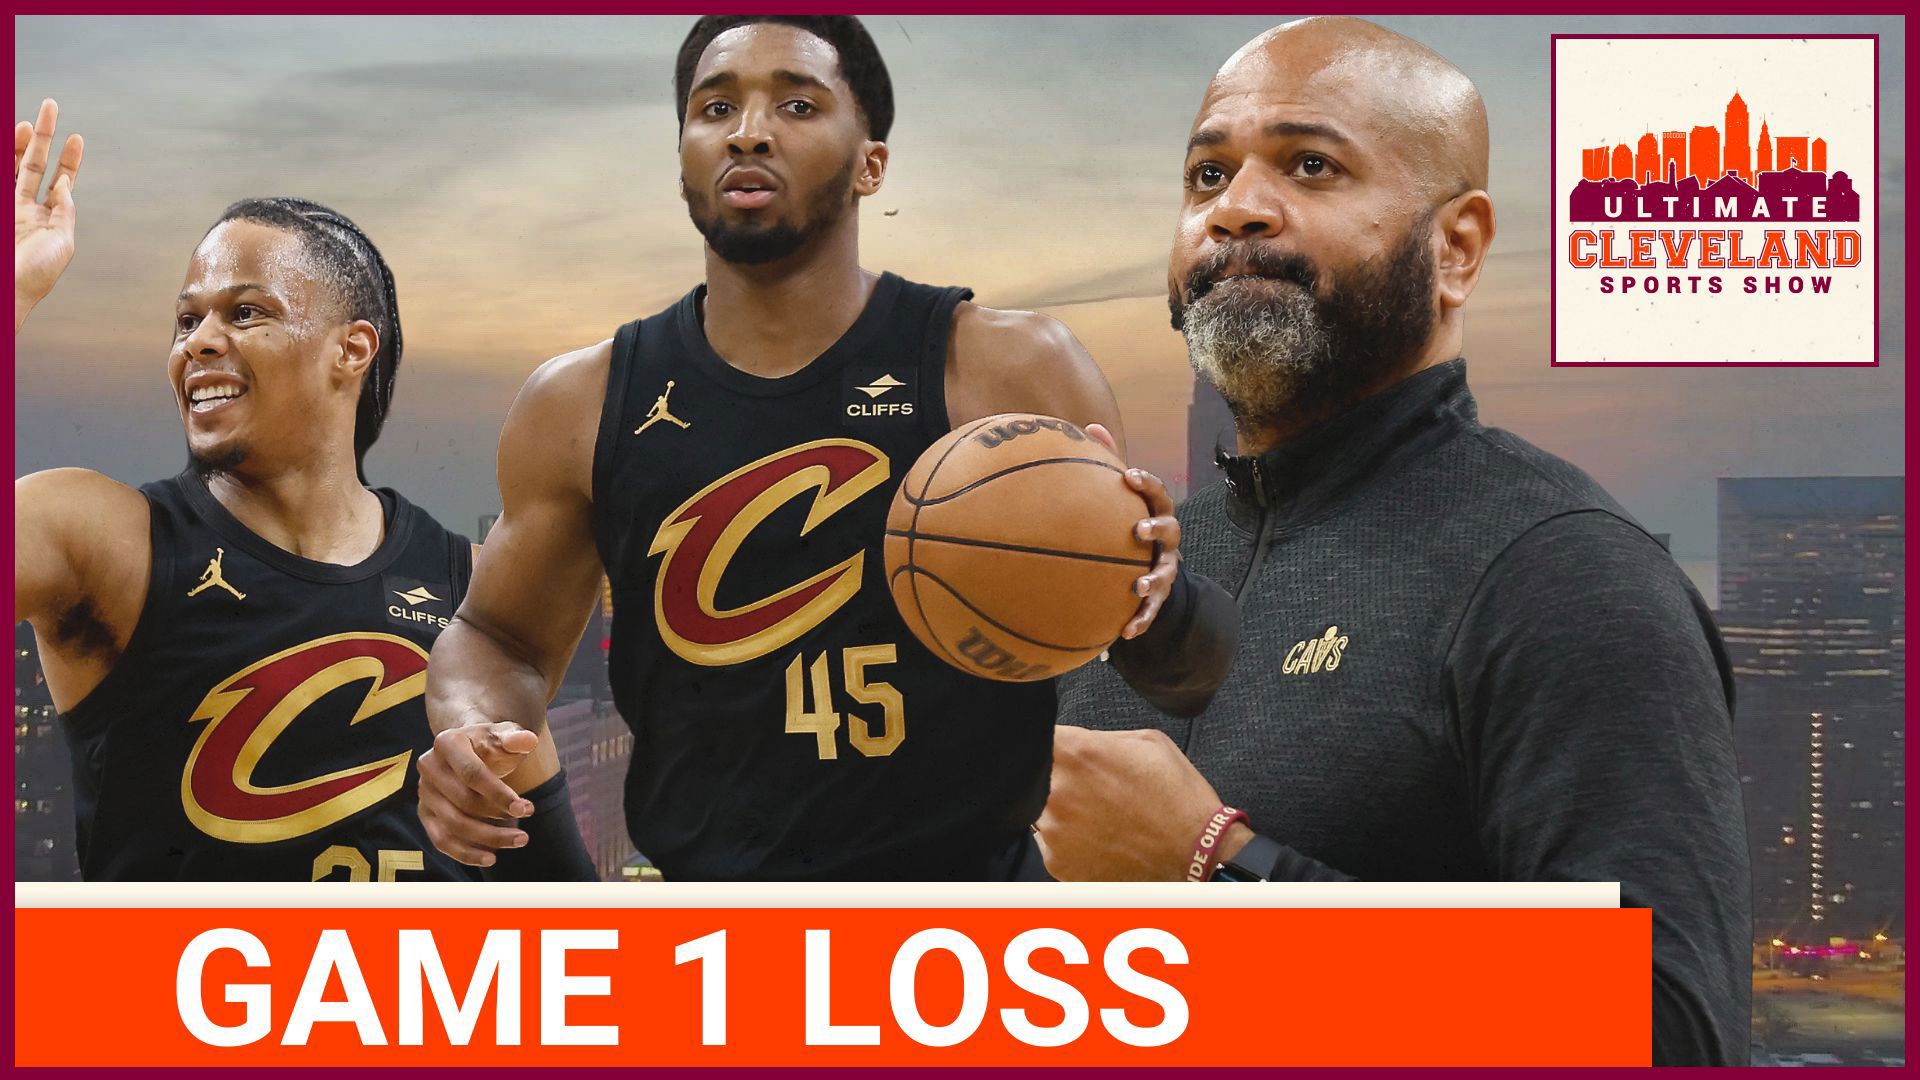 Cleveland Cavaliers have yet to win a road playoff game this post season after losing to the Boston Celtics in Game one. What changes need to be made for game two?